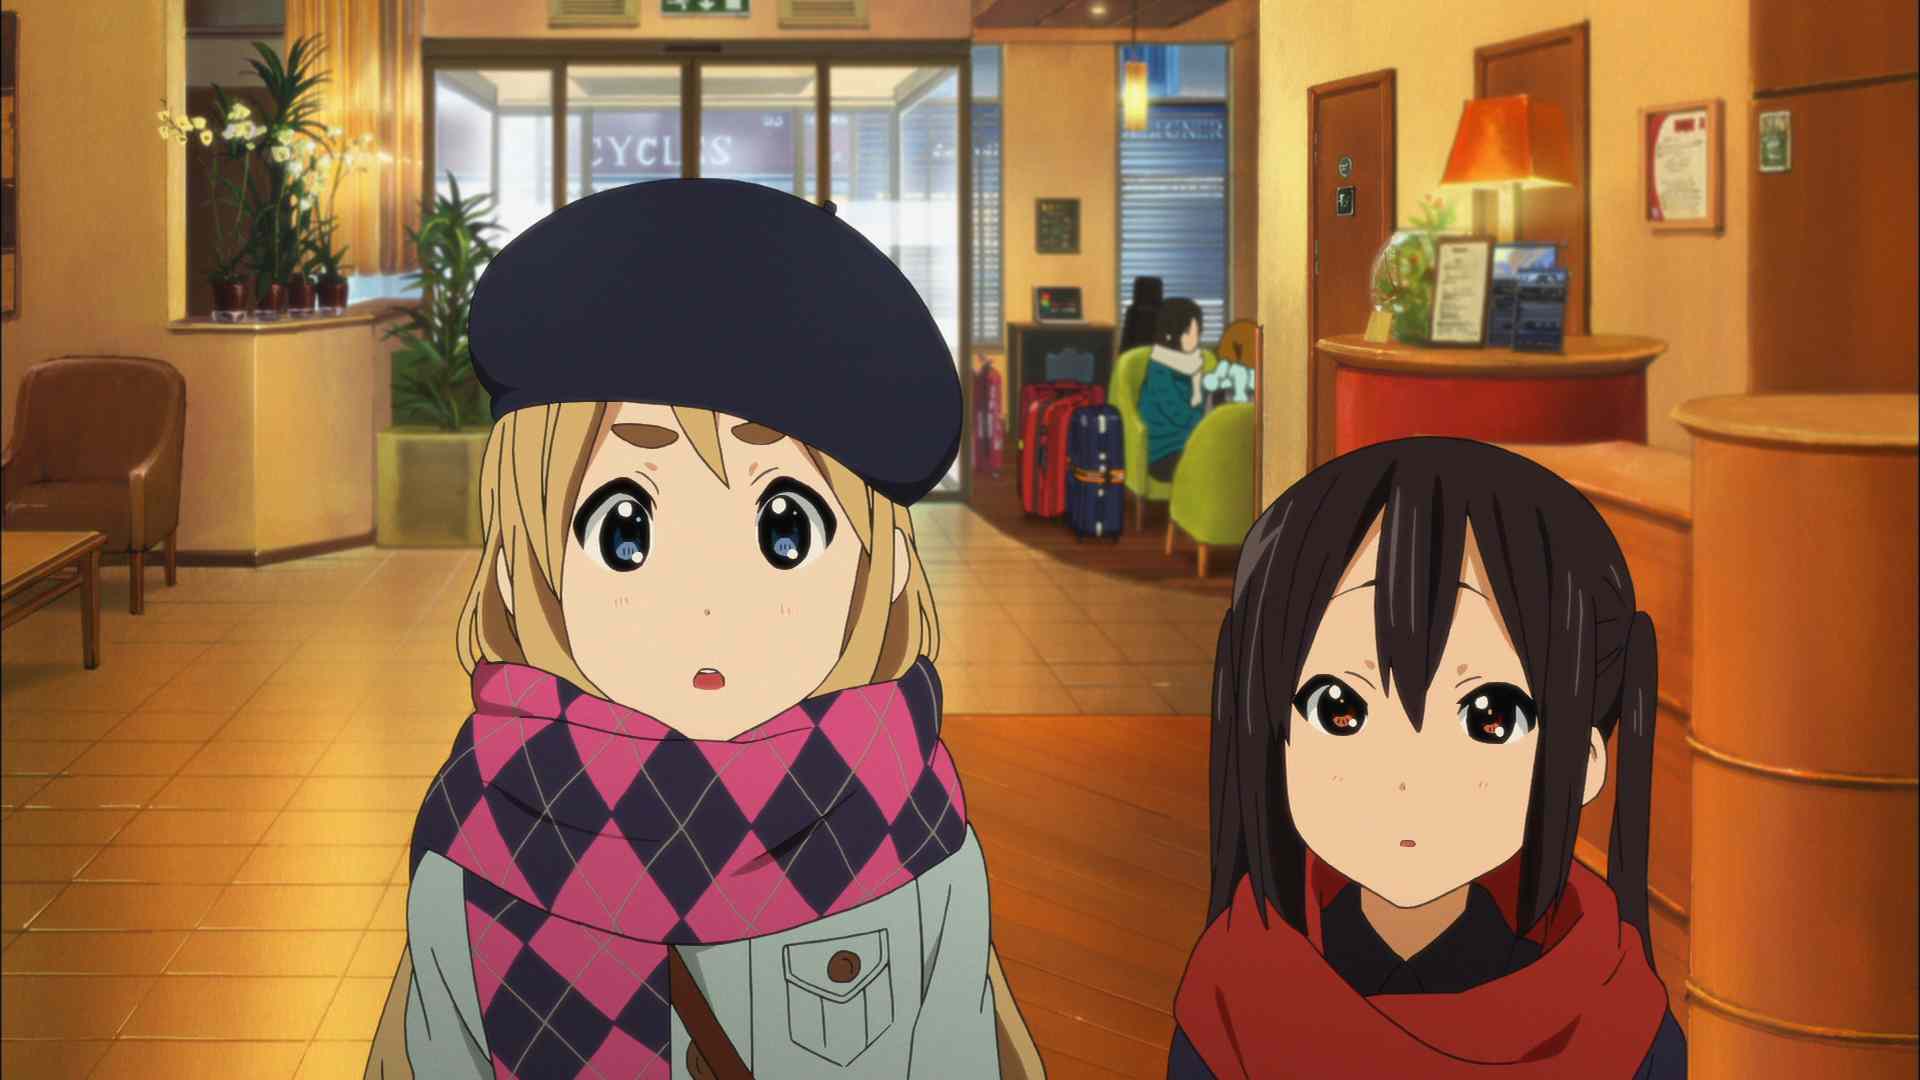 Anime icons in London: K-On! The Movie review